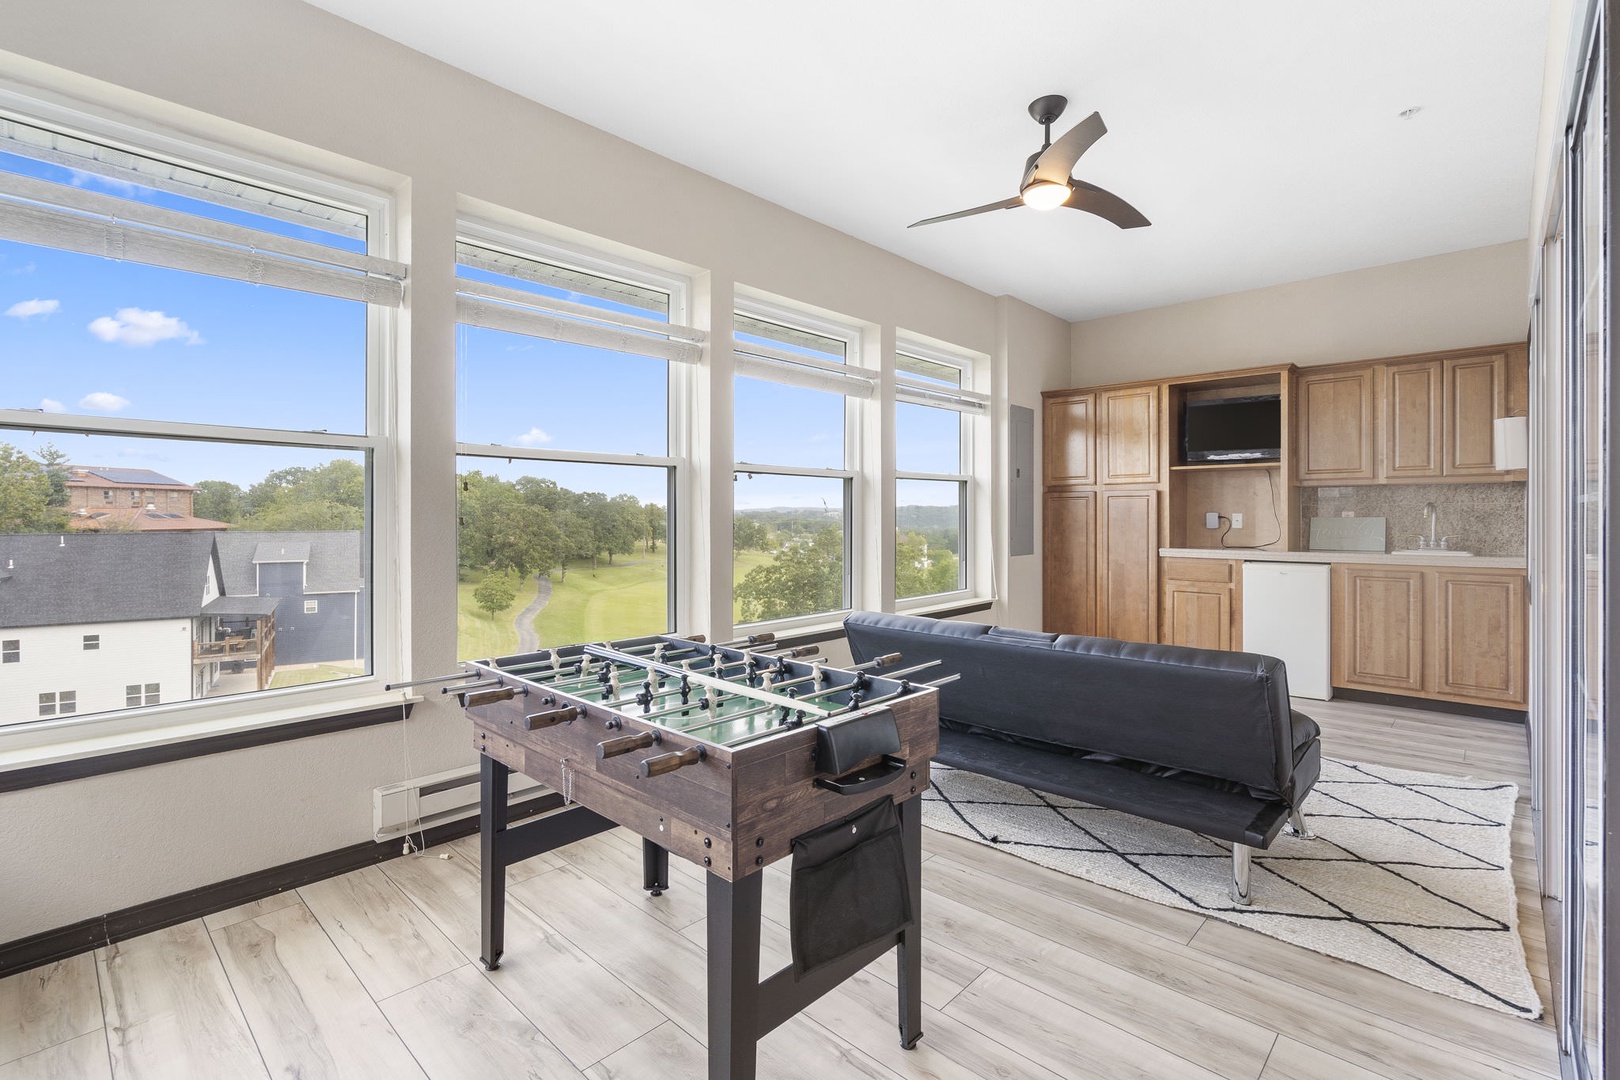 Bright sunroom with foosball, seating area, and TV